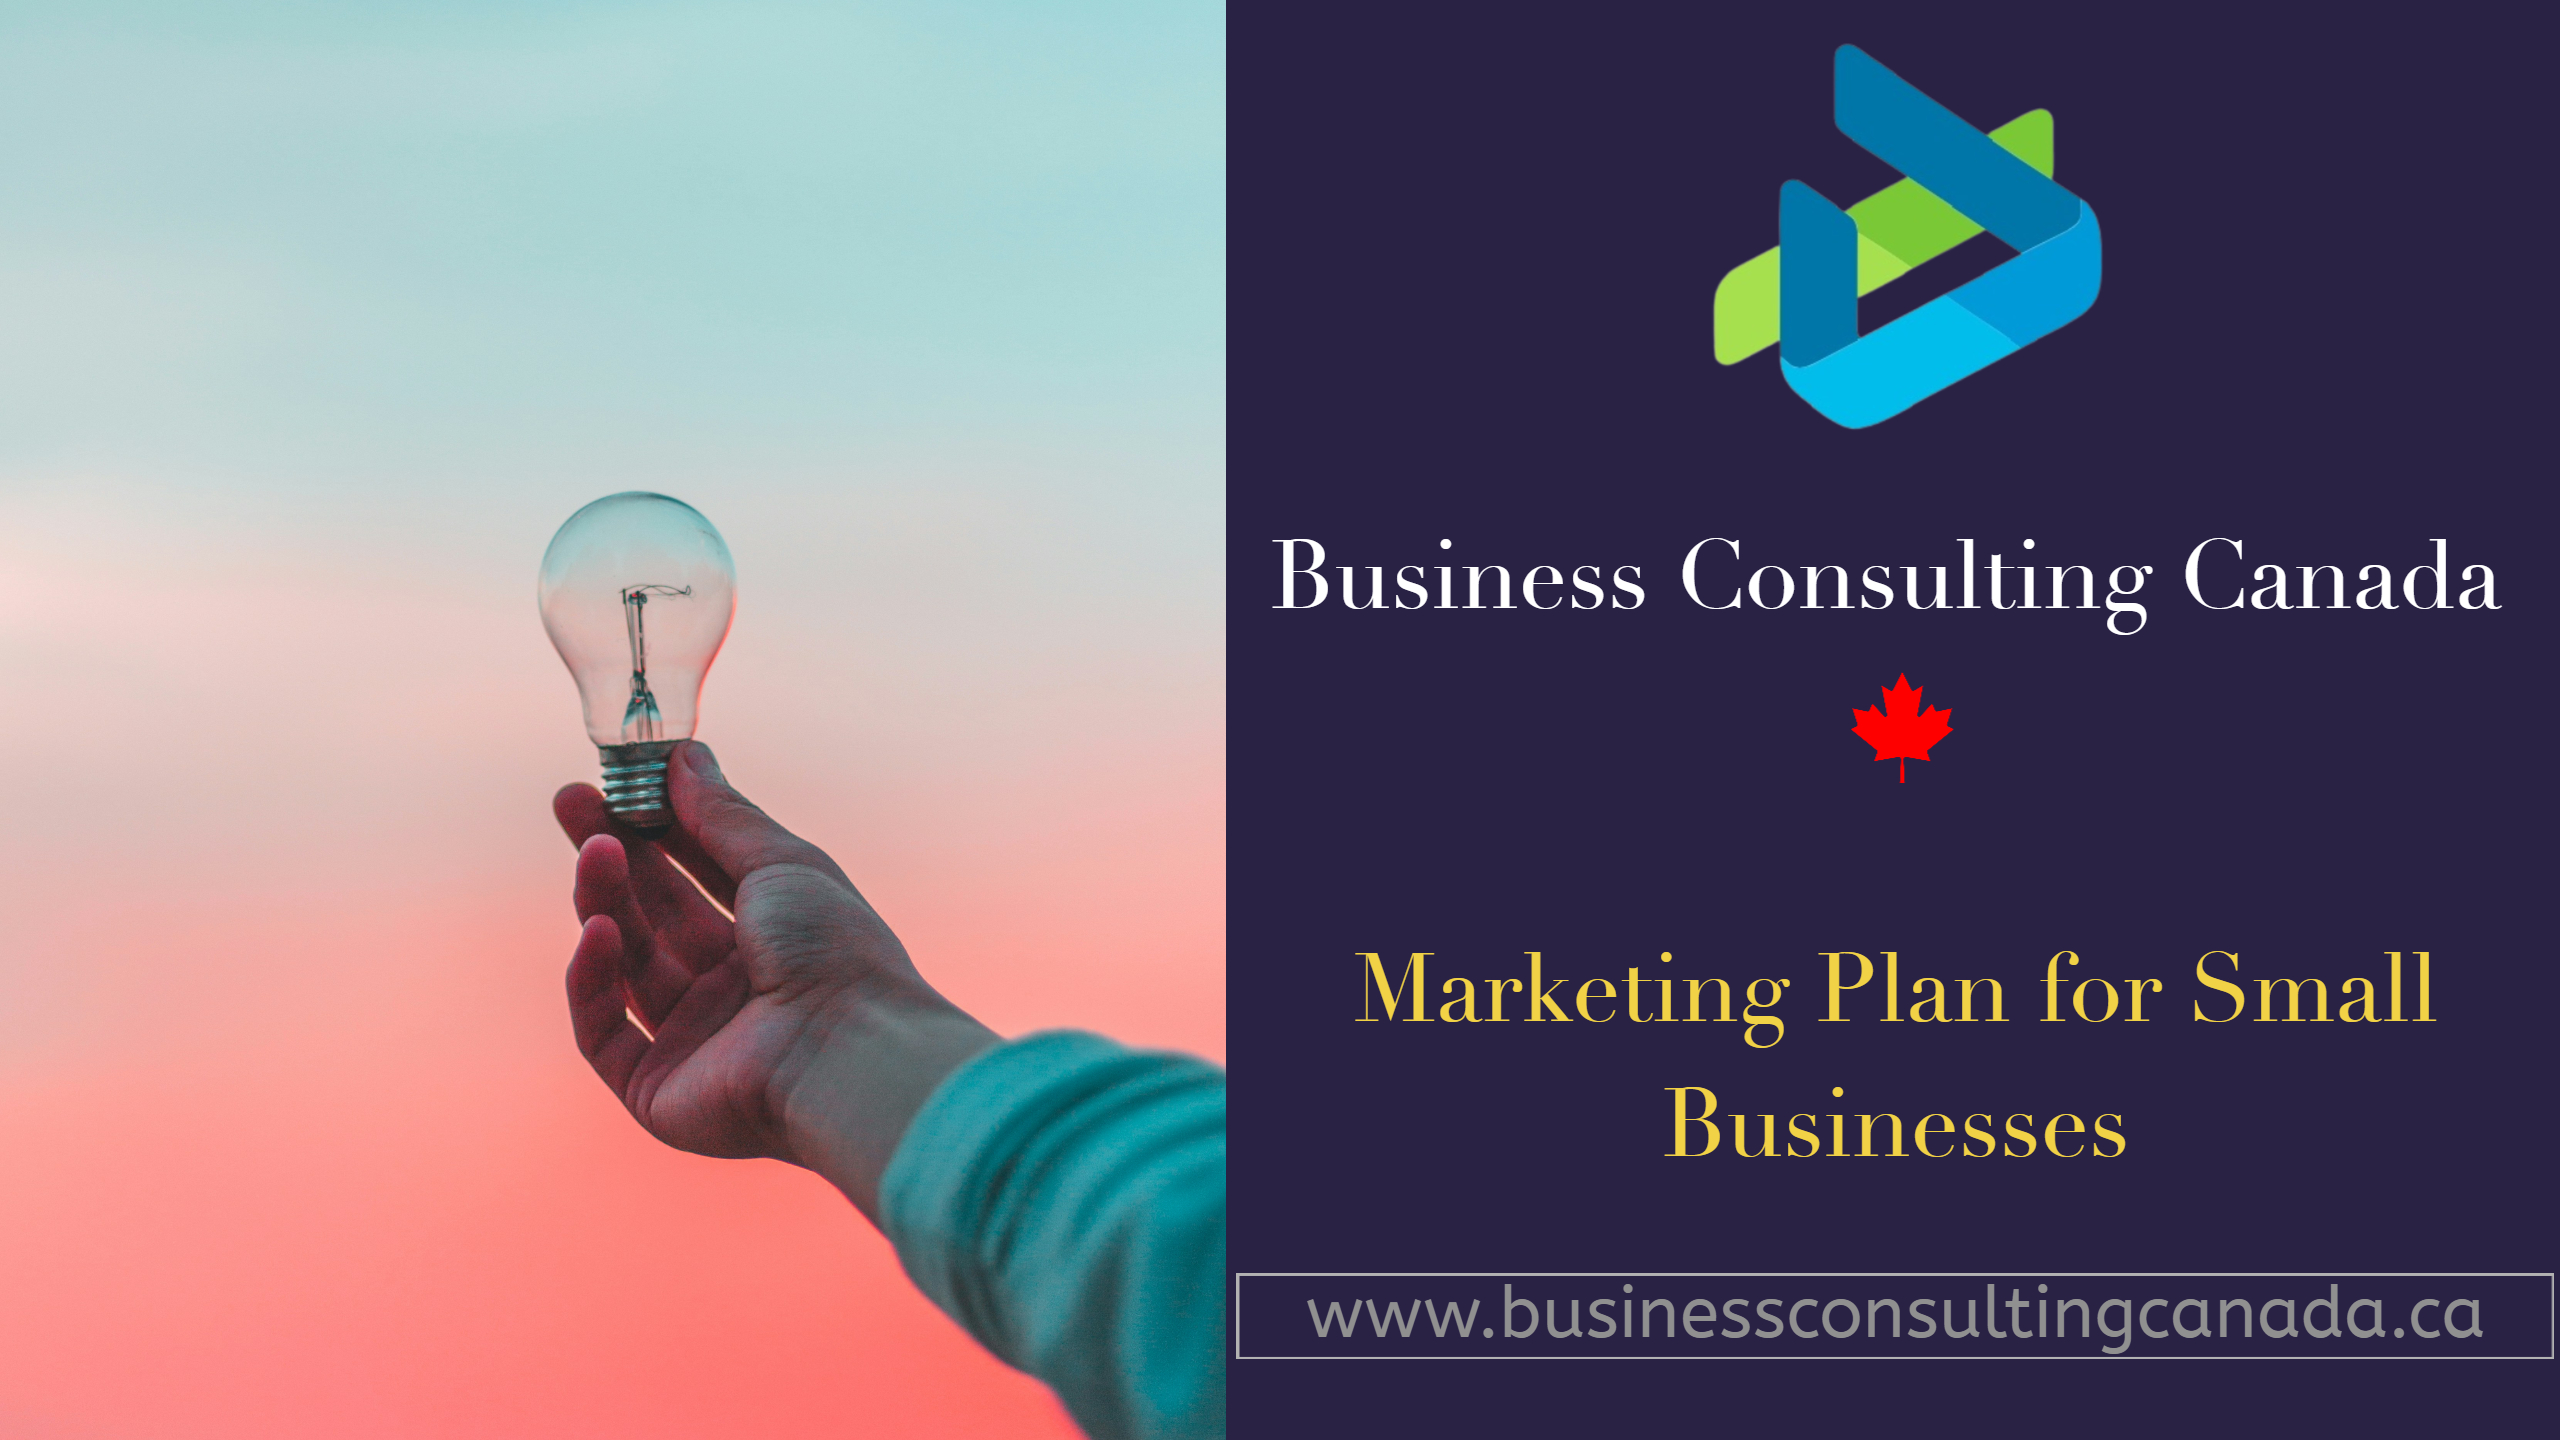 Marketing Plan for Small Businesses